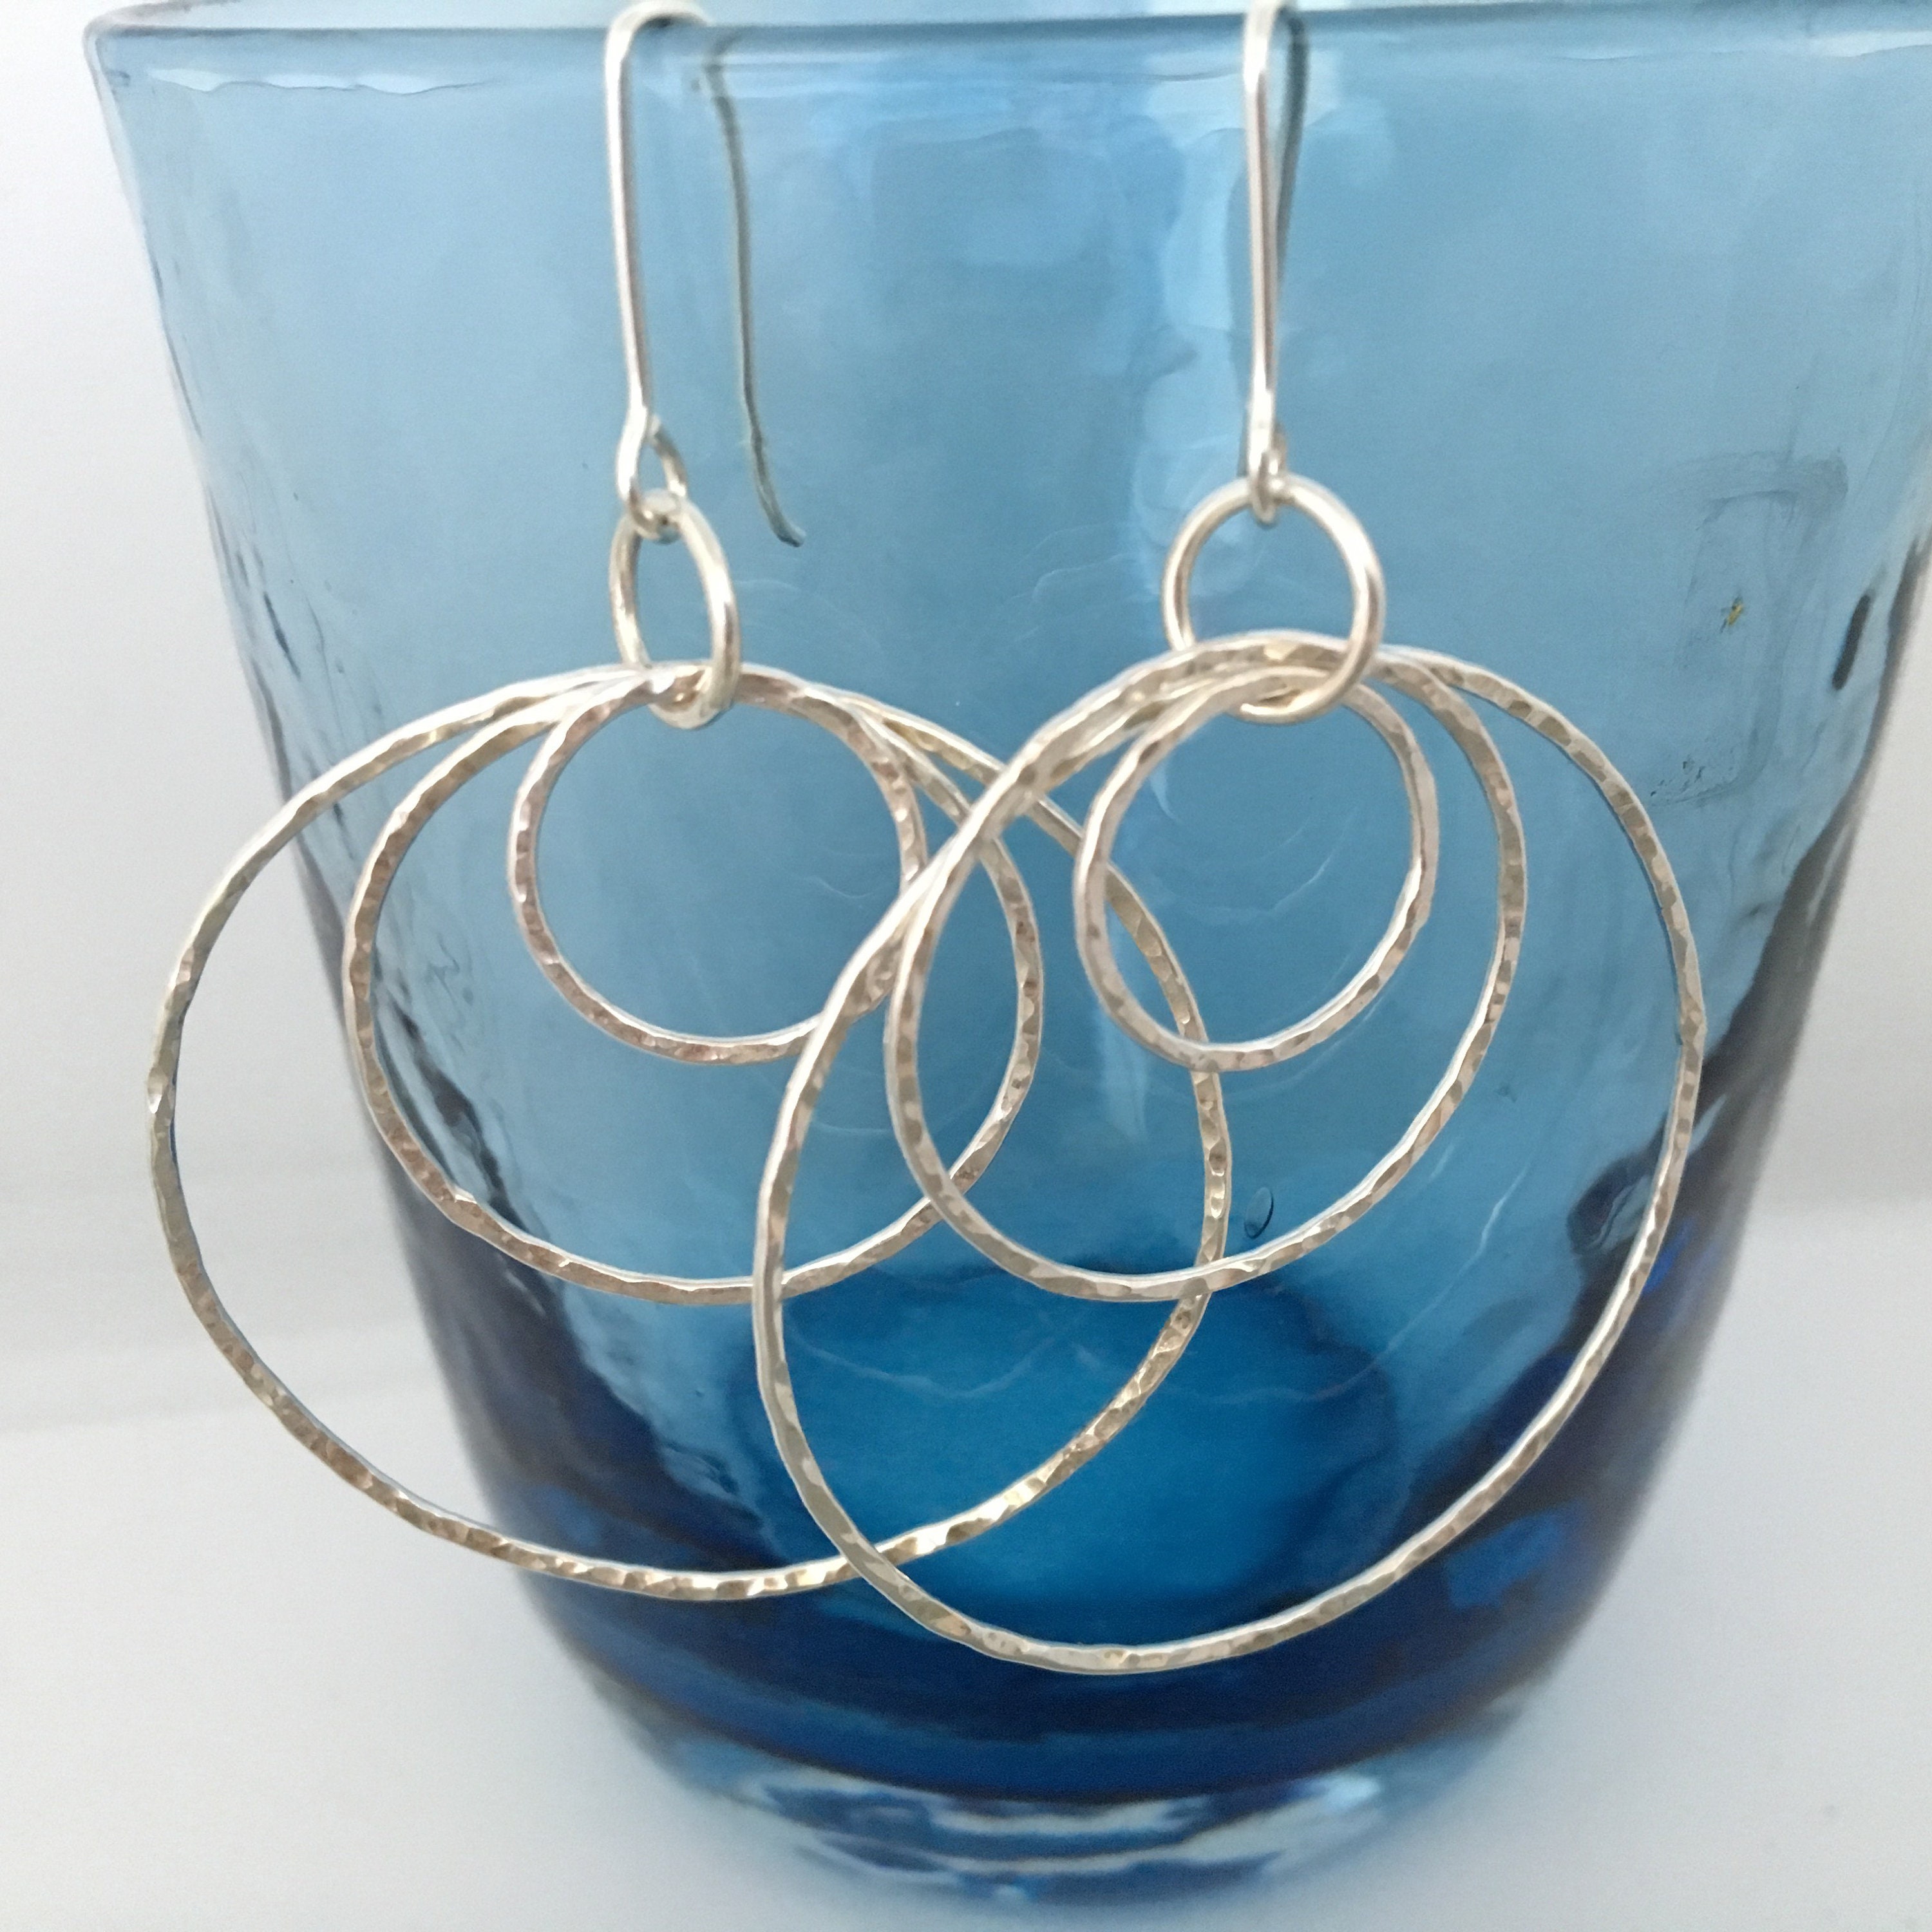 Extra Large Silver Triple Hoop Earrings With A Sparkly Hammered Finish